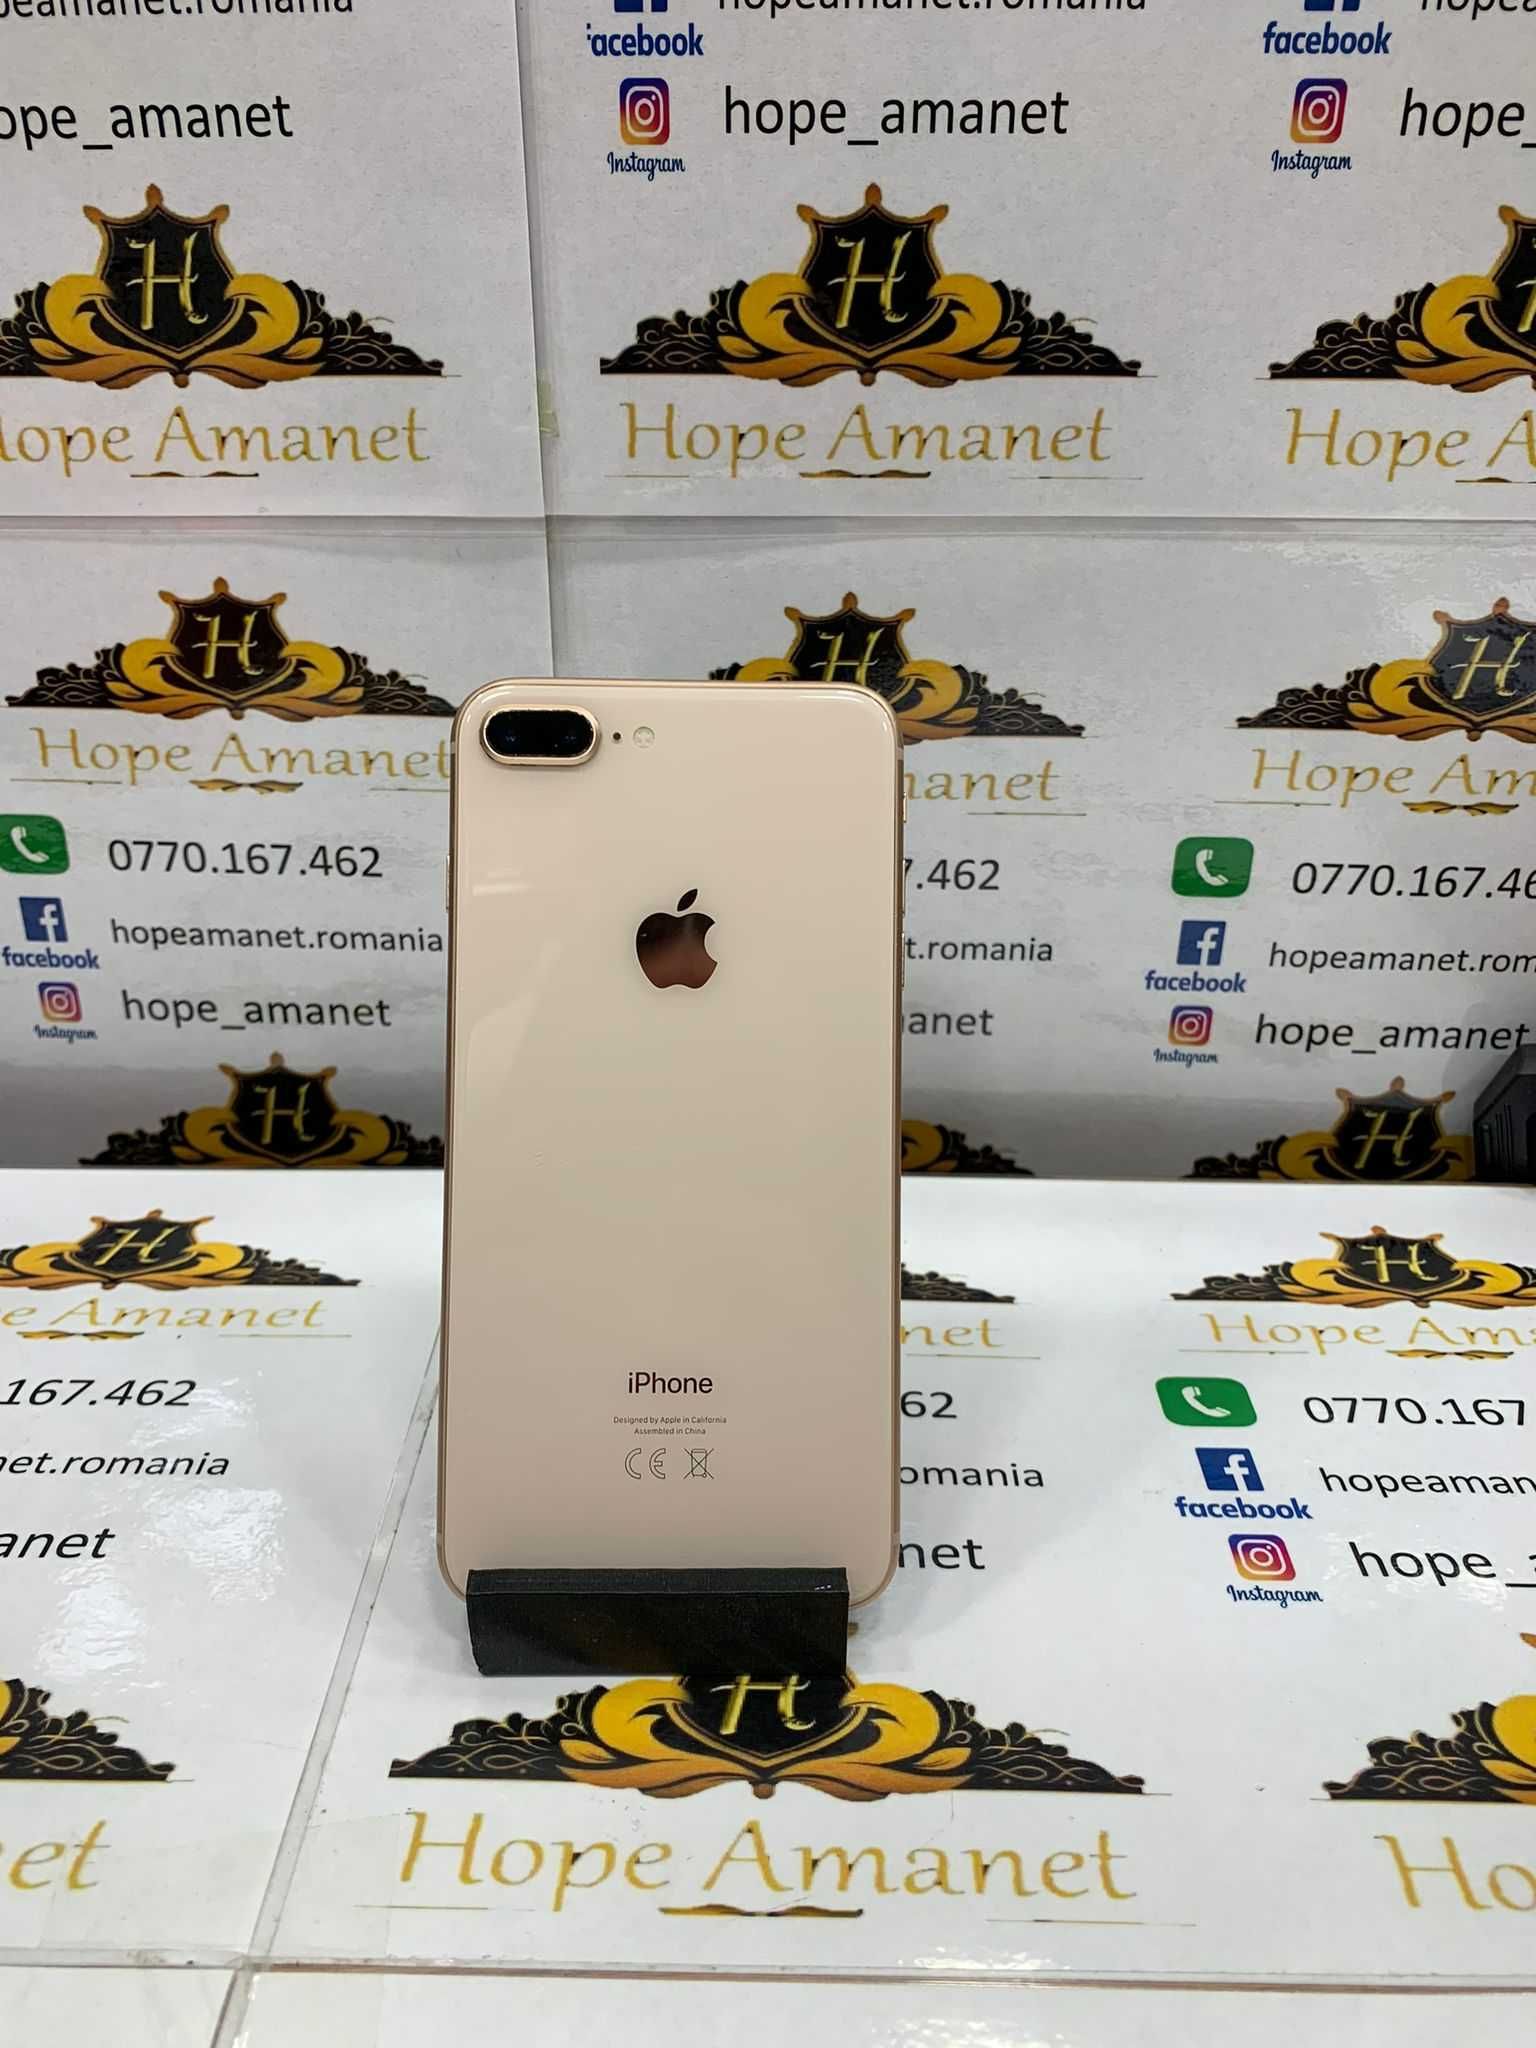 Hope Amanet P12 - Iphone 8 Plus / Stocare 64 GB / Baterie 72% / Gold